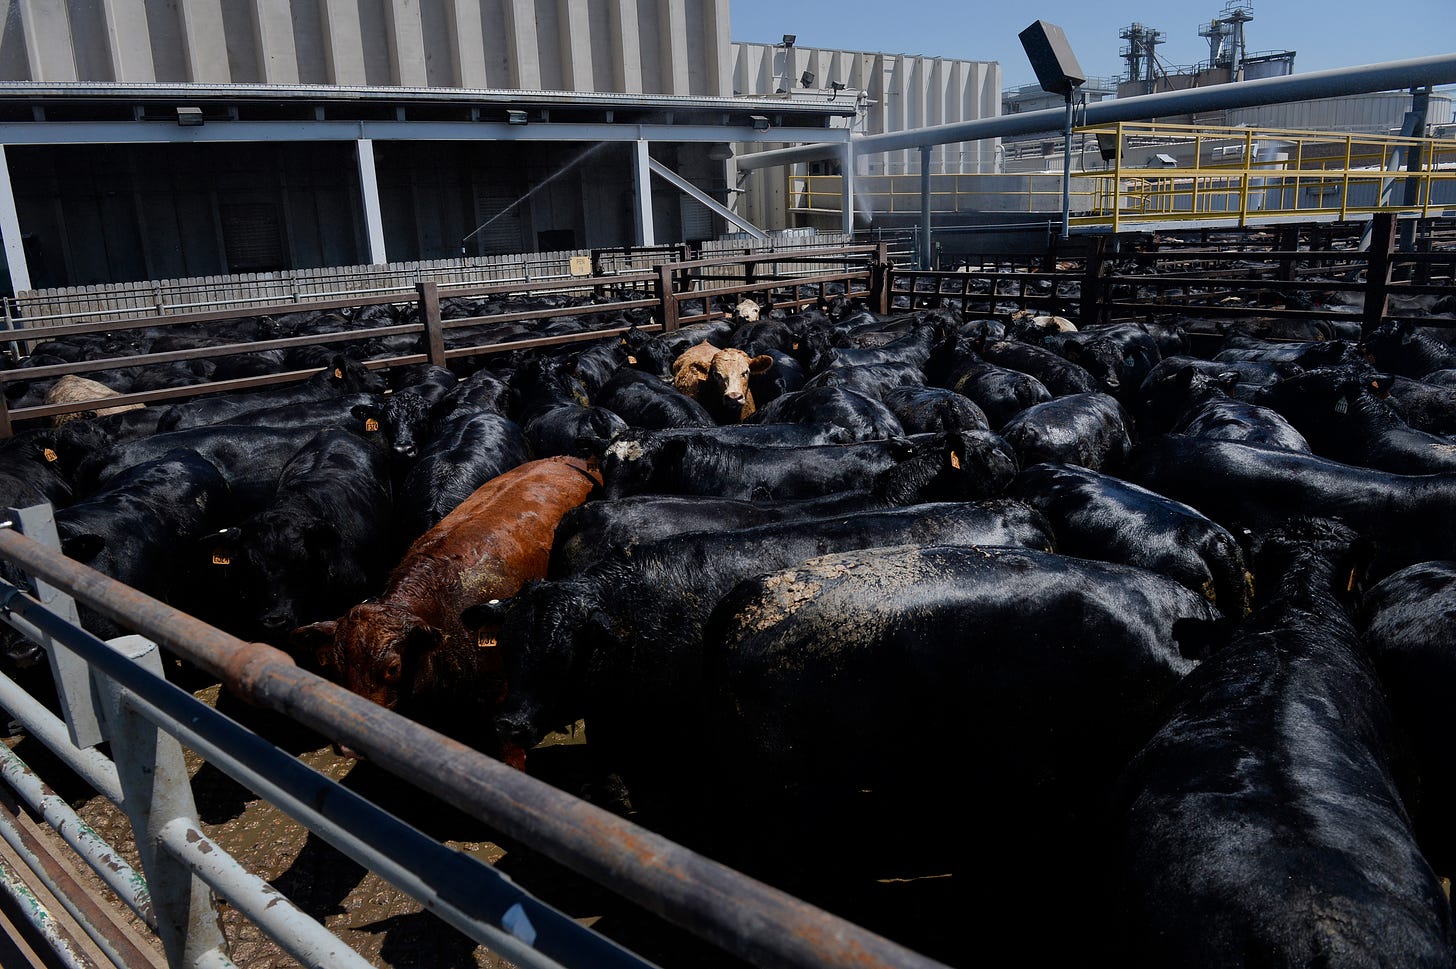 Beef cattle are gathered in pens at the JBS Beef Plant in Greeley, Colo. The New York State Attorney General recently filed a lawsuit against JBS, the world’s largest beef company. Credit: Andy Cross/The Denver Post via Getty Images